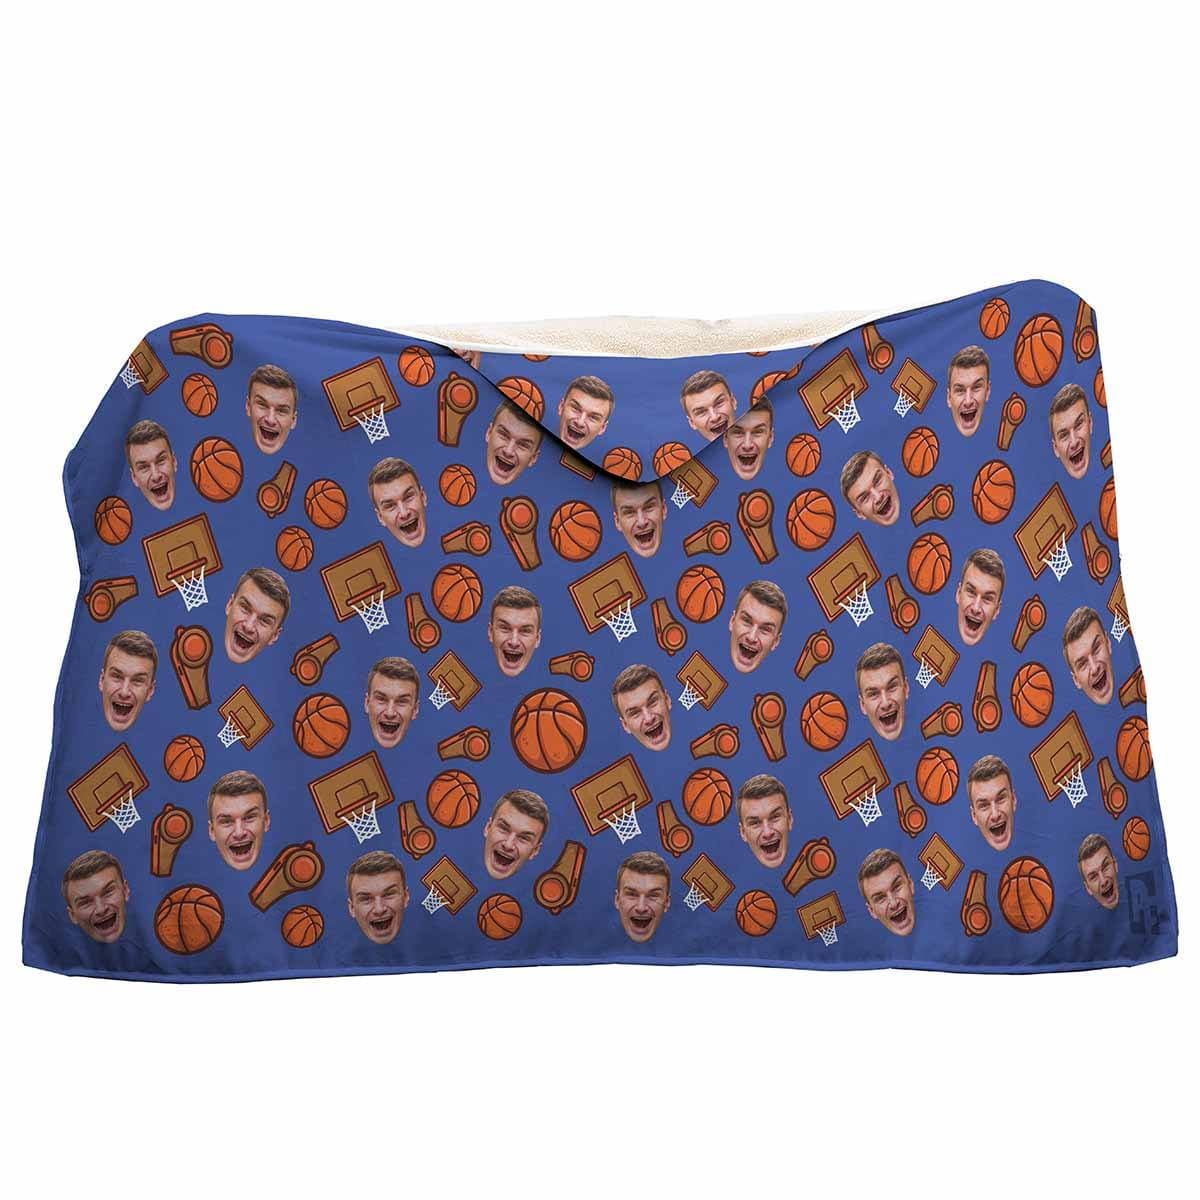 darkblue Basketball hooded blanket personalized with photo of face printed on it